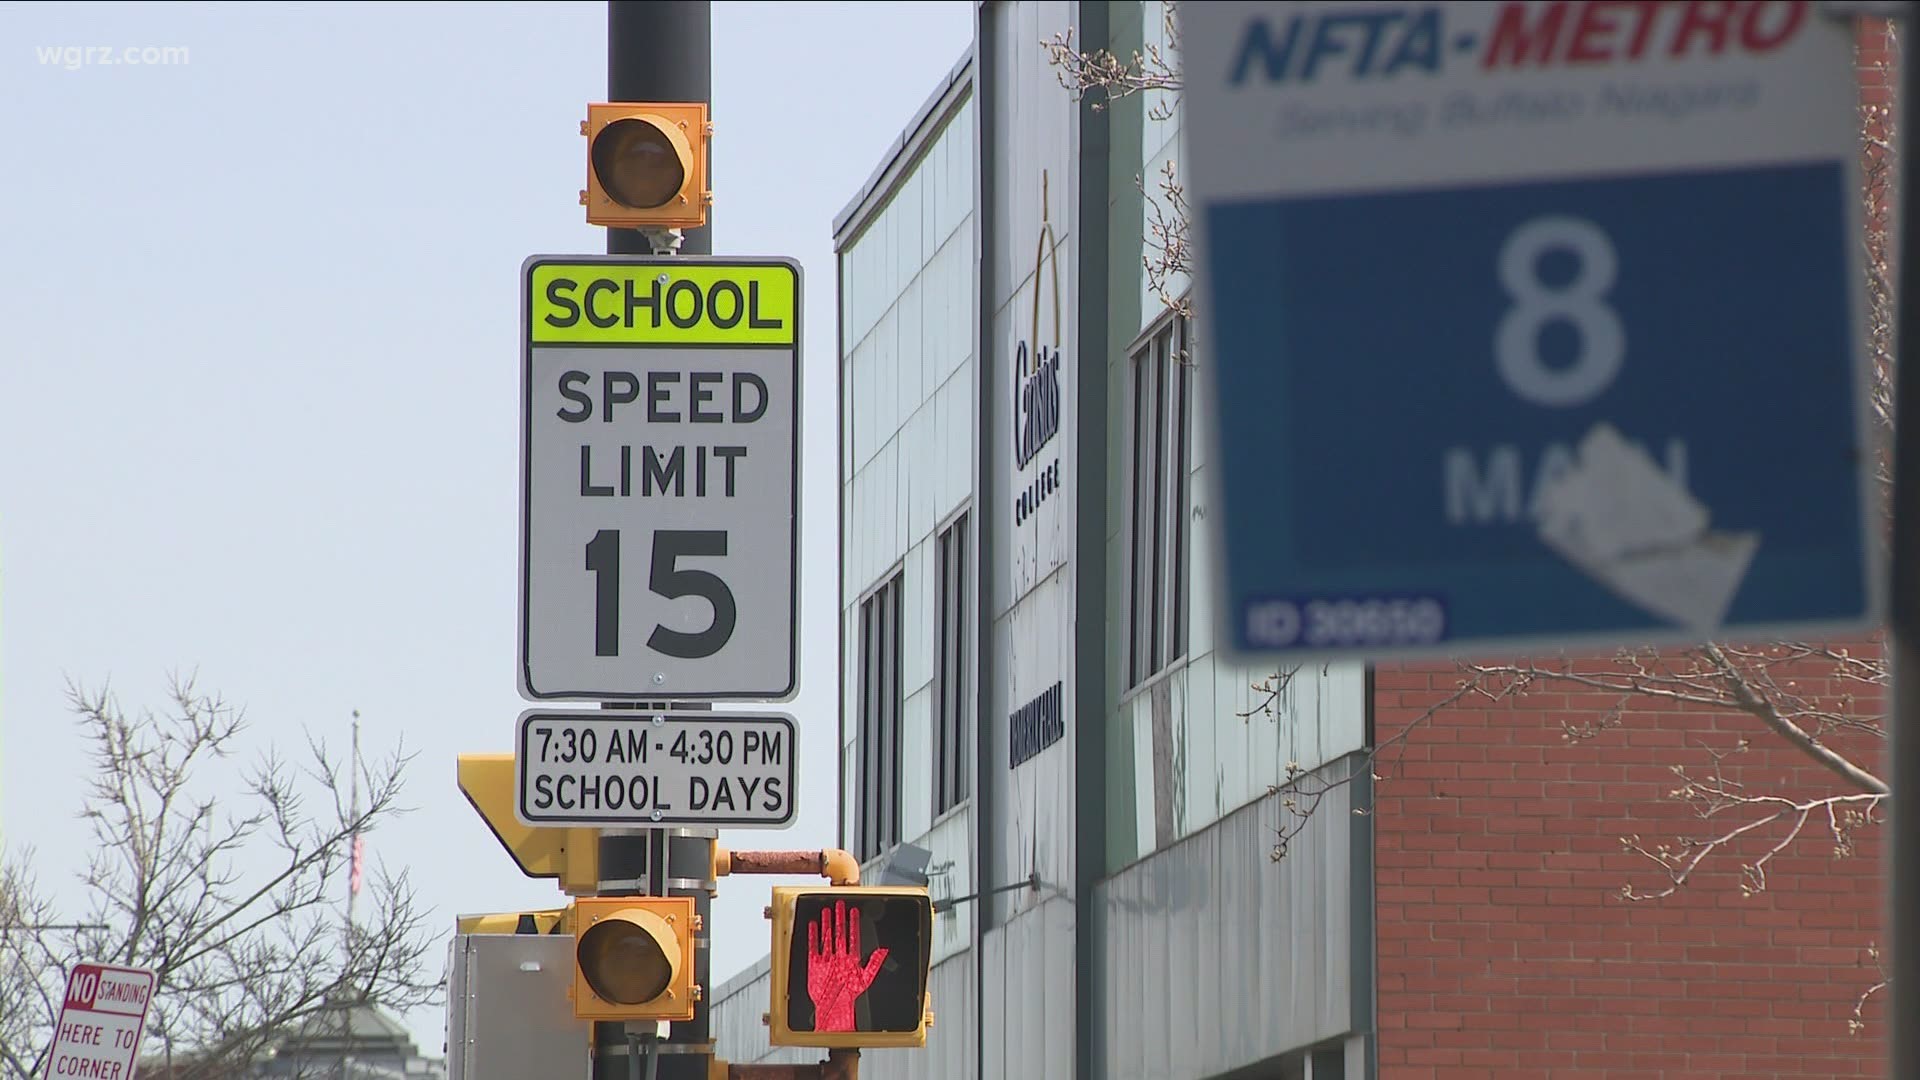 For months it's been a back-and-forth discussion about the cameras in school zones designed to catch speeders. Today was no exception.